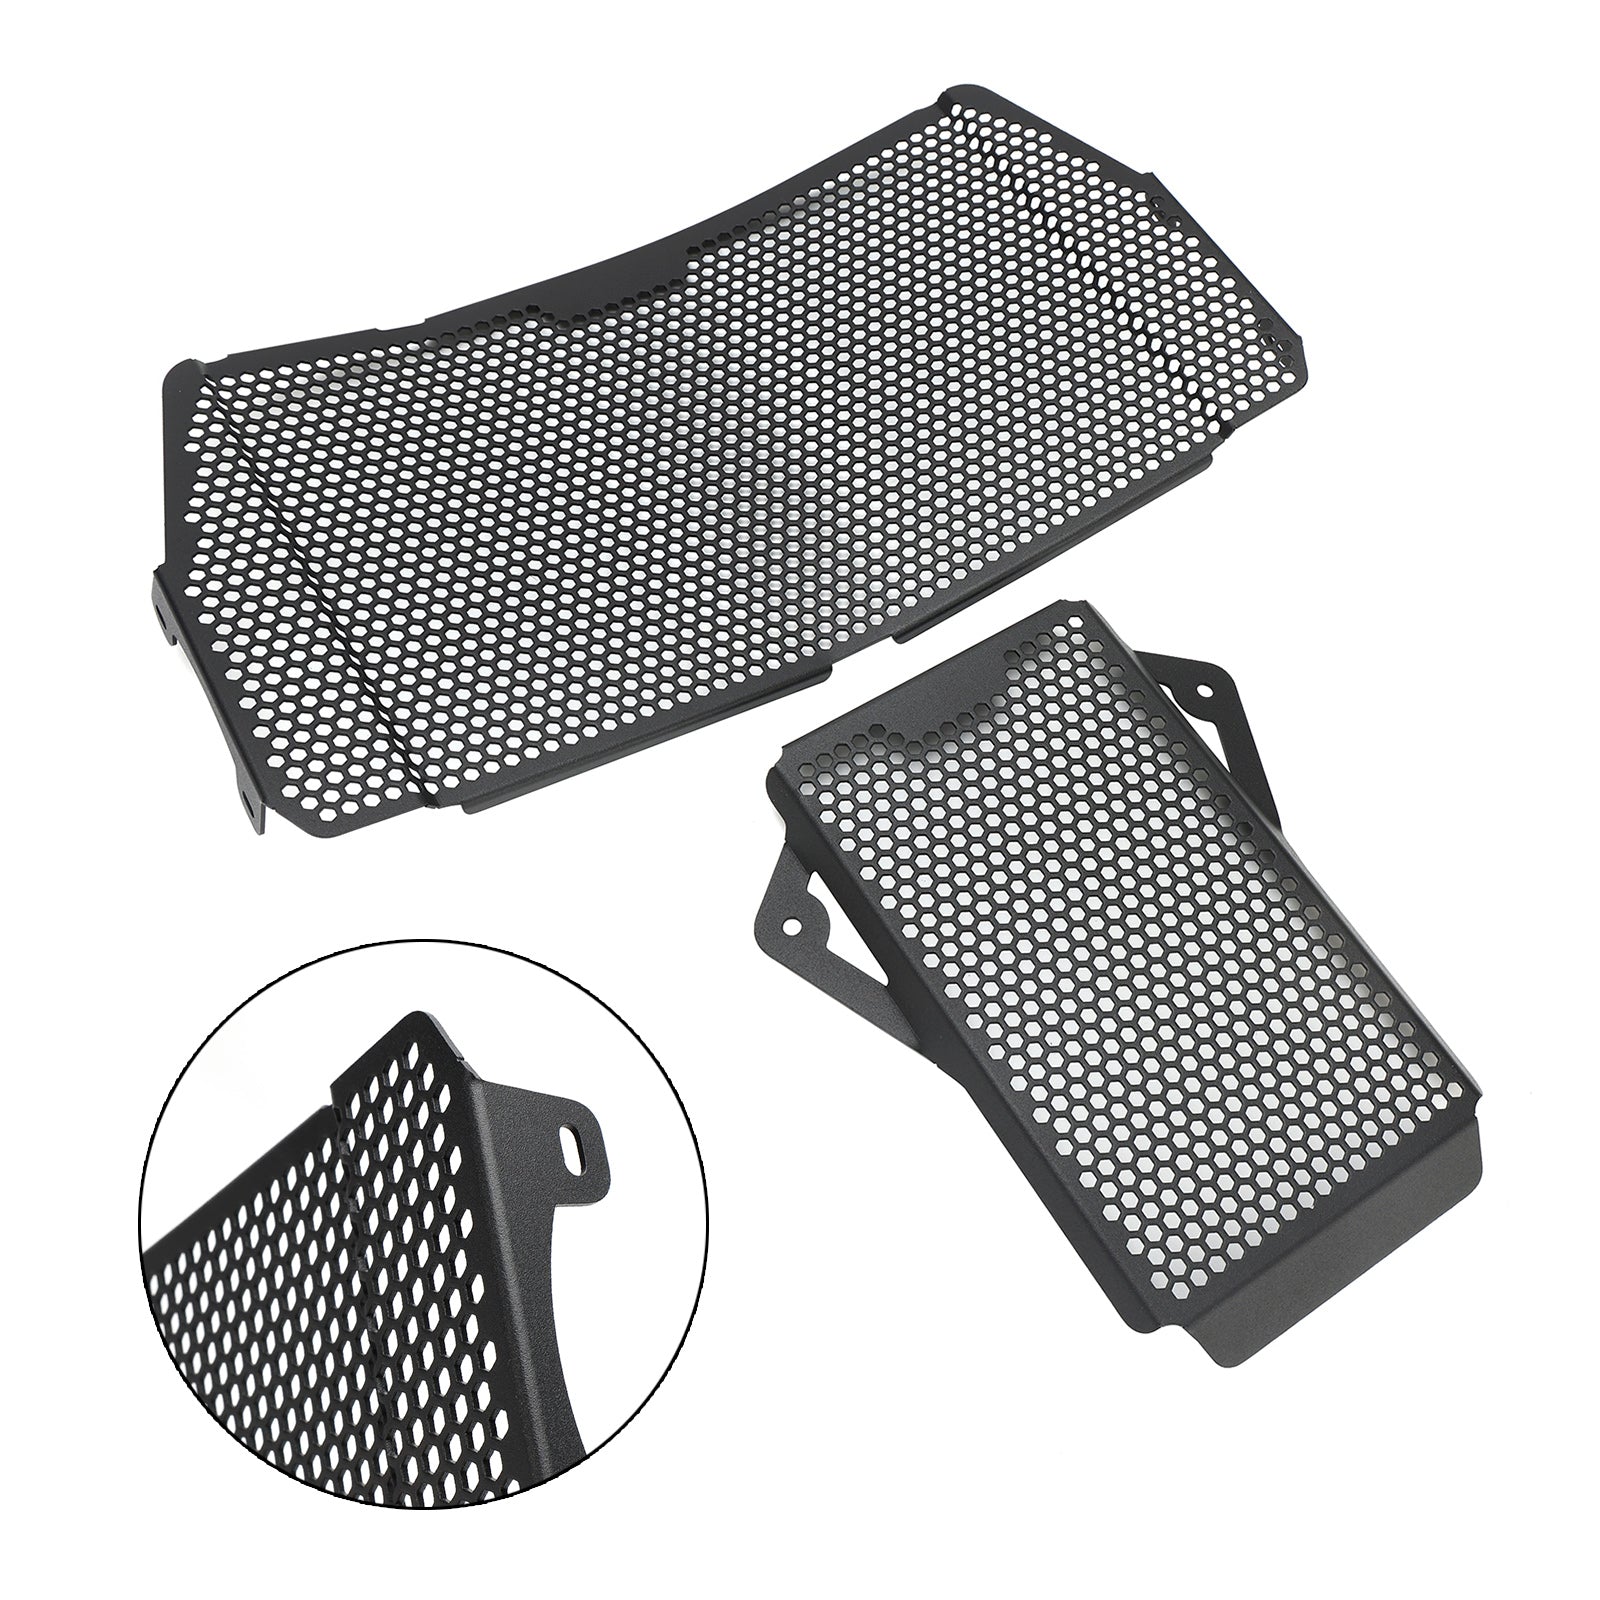 Radiator Guard Protector Radiator Cover Fits For Ducati Supersport 930 950 21-23